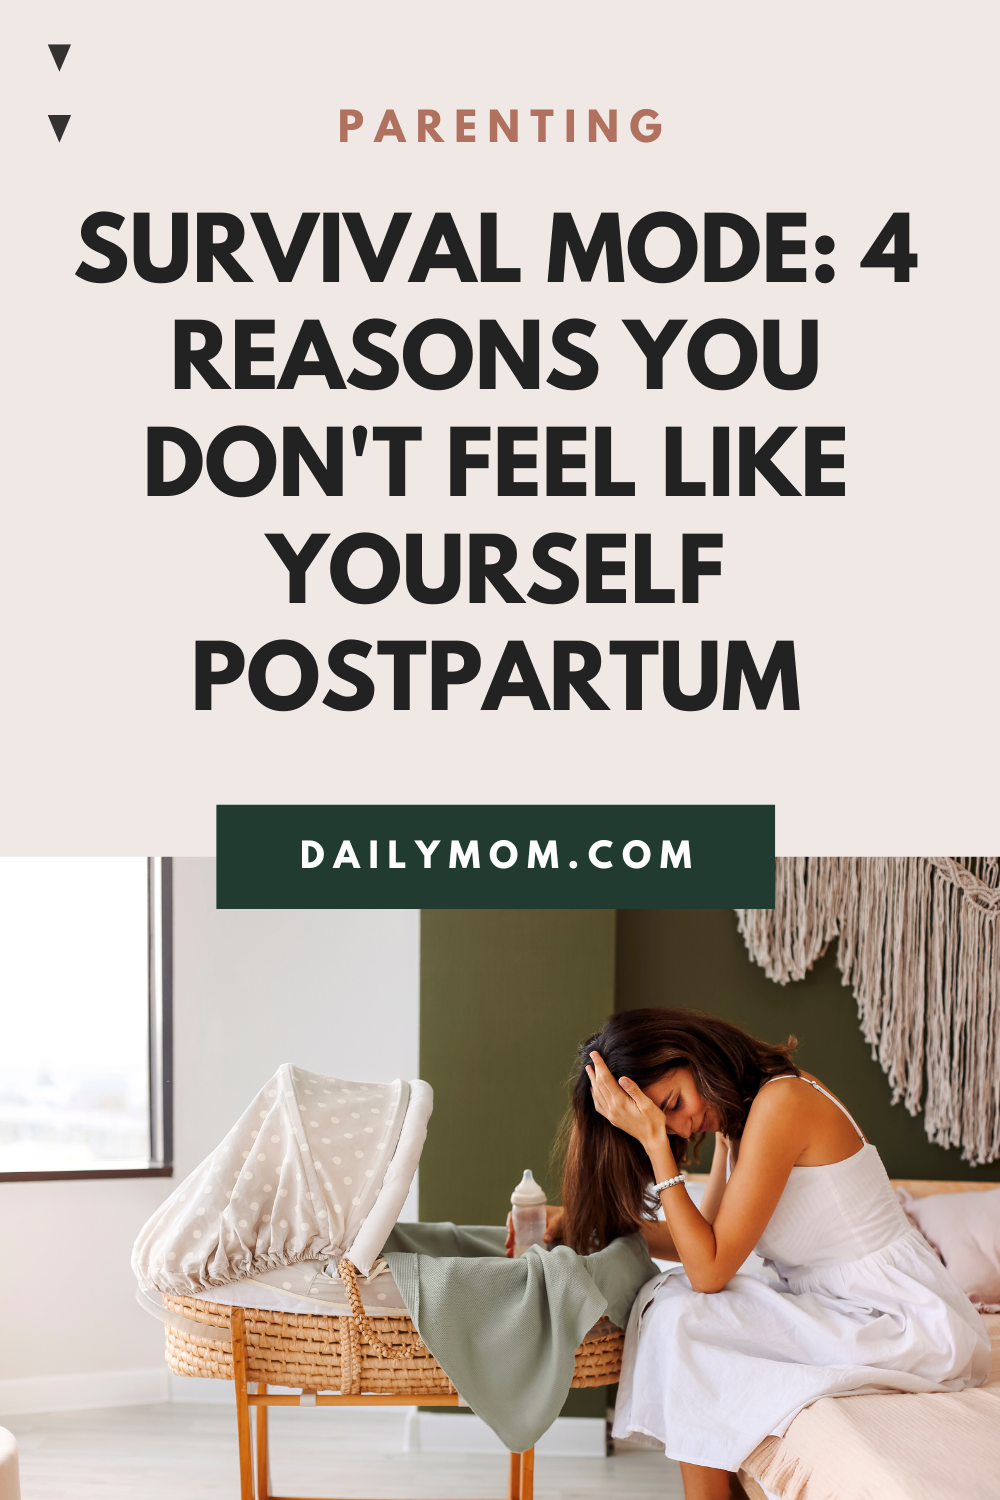 Living In Survival Mode: 4 Reasons You Don't Feel Like Yourself Postpartum